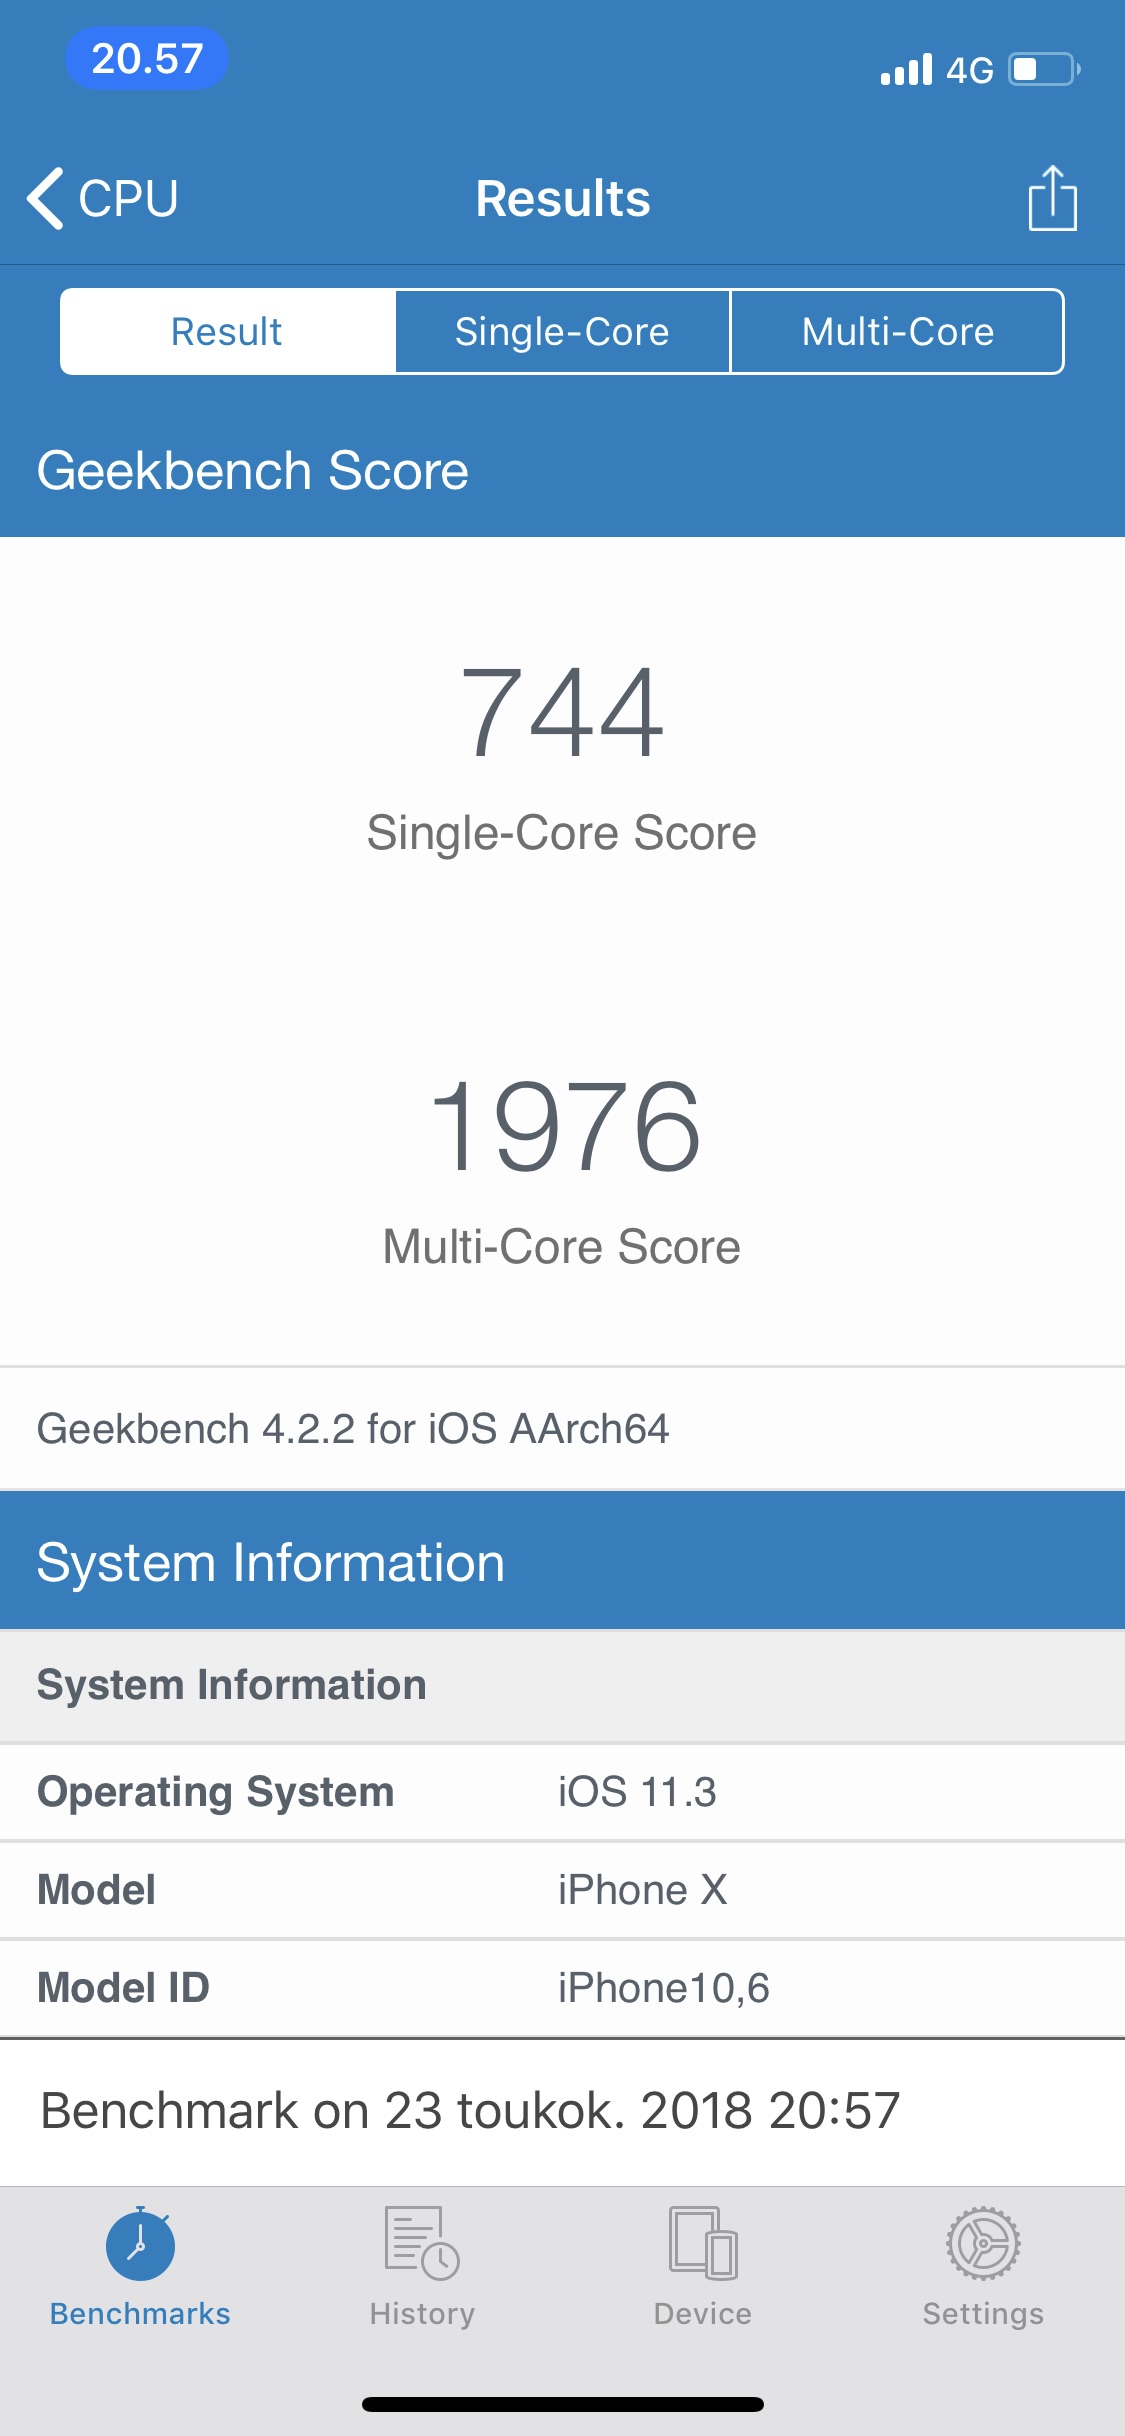 iPhone X running hot and low on benchmarks - Apple Community